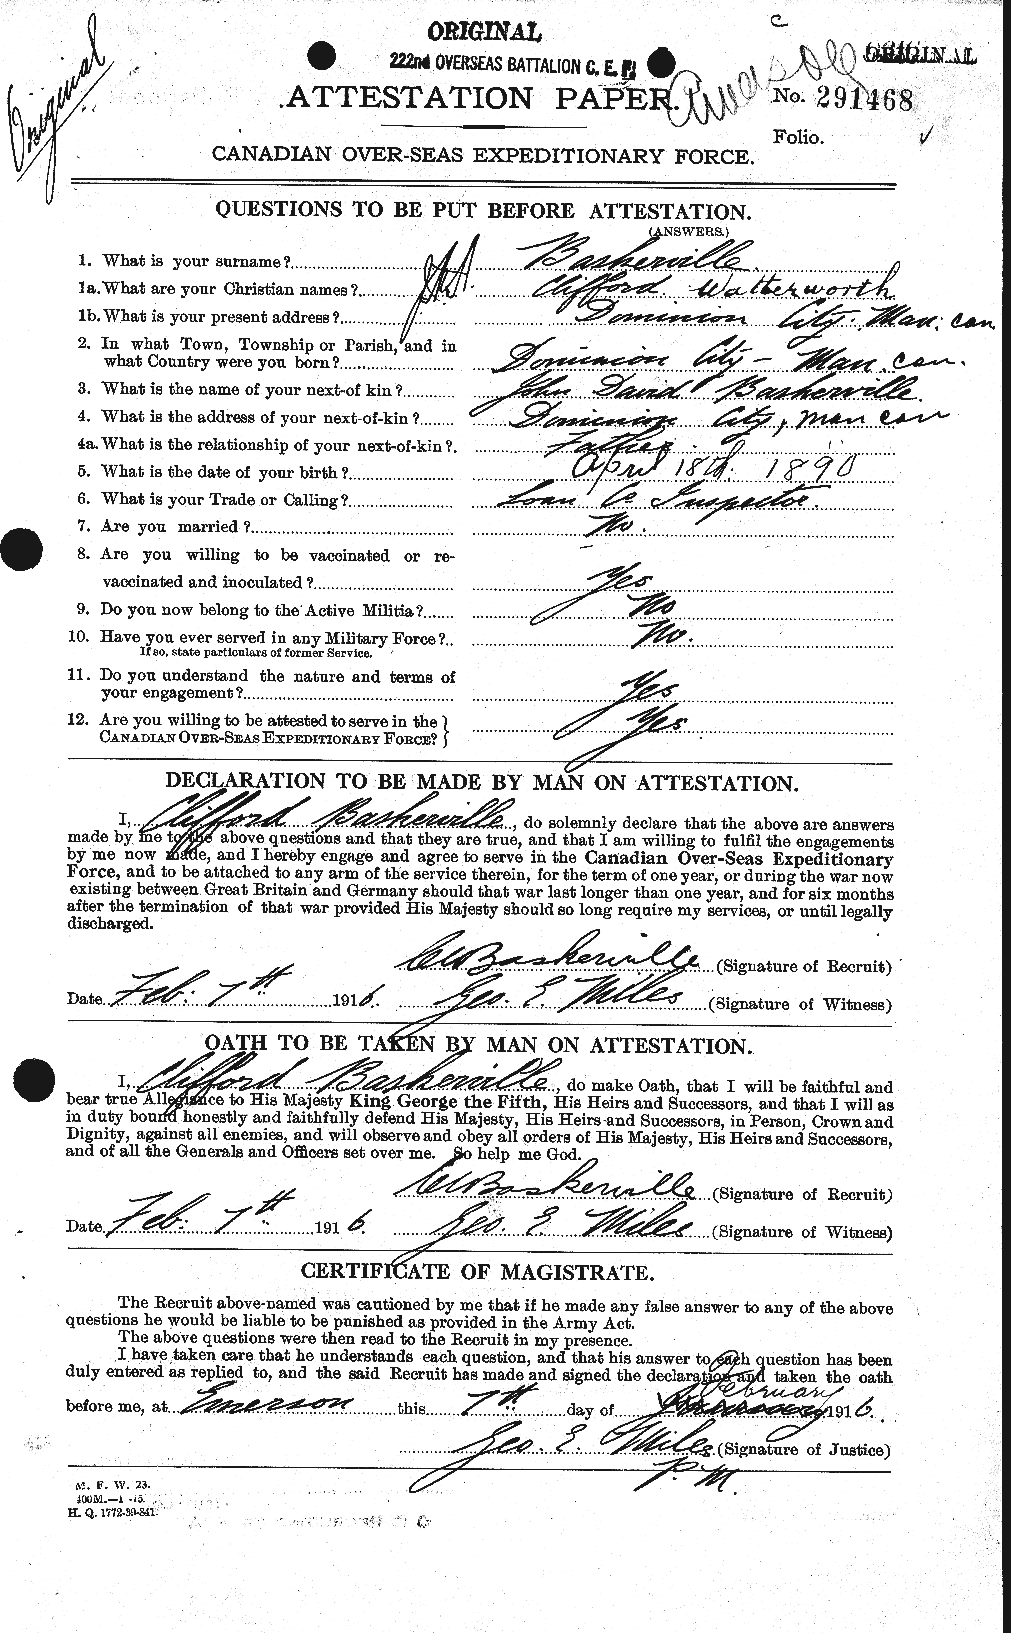 Personnel Records of the First World War - CEF 221191a